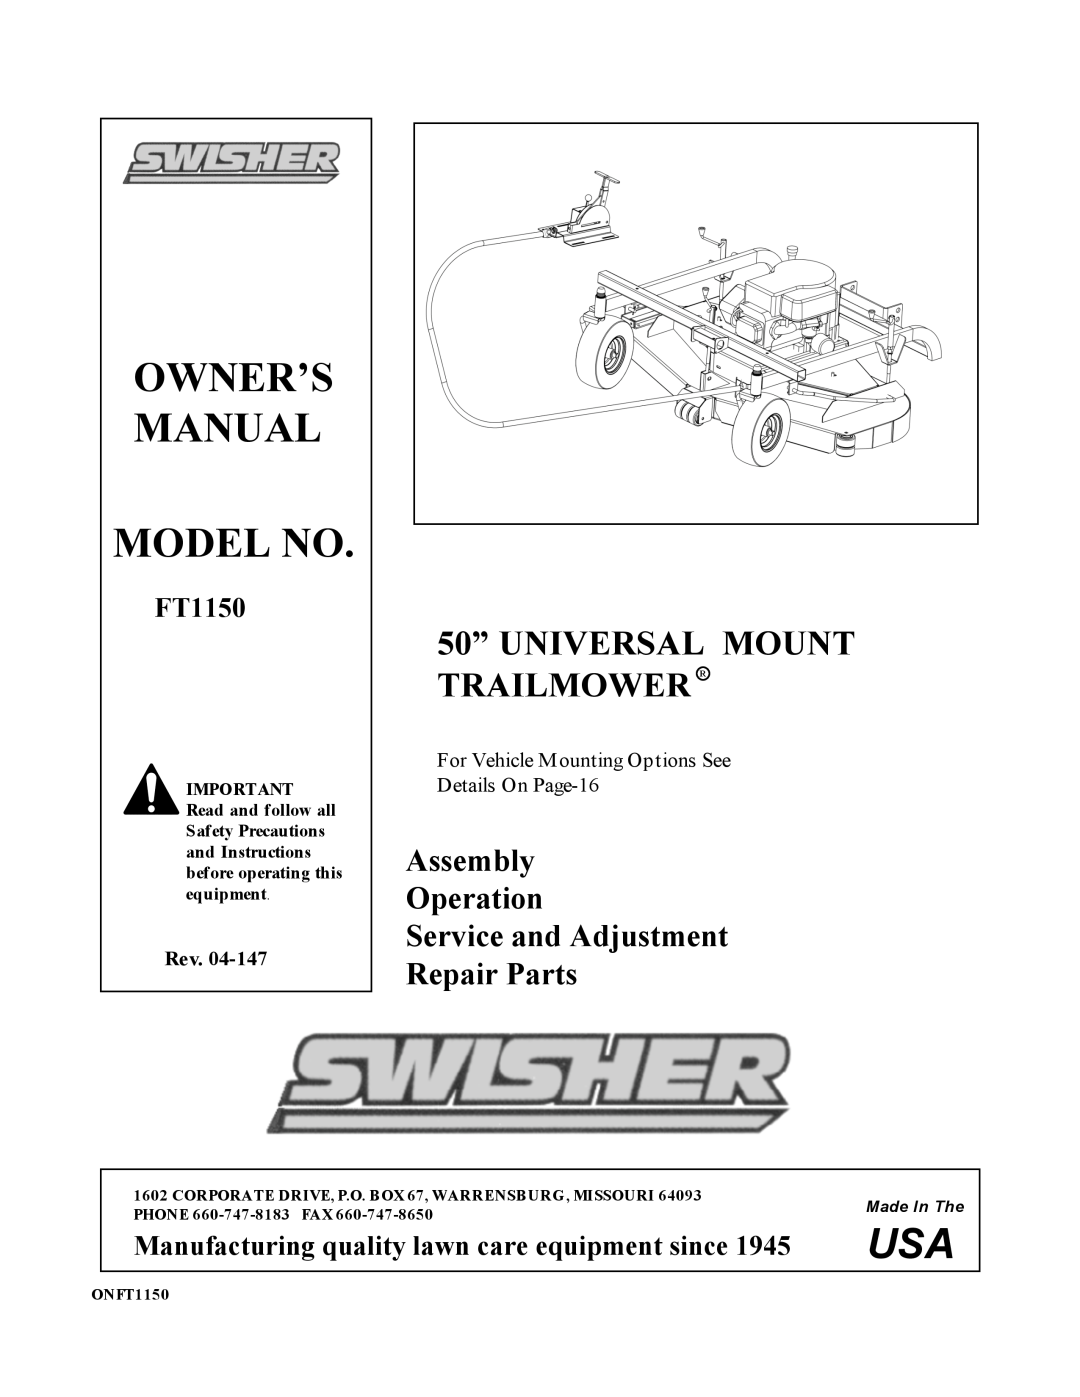 Swisher ONFT1150 manual Assembly Operation Service and Adjustment Repair Parts, 50” UNIVERSAL MOUNT TRAILMOWER R 